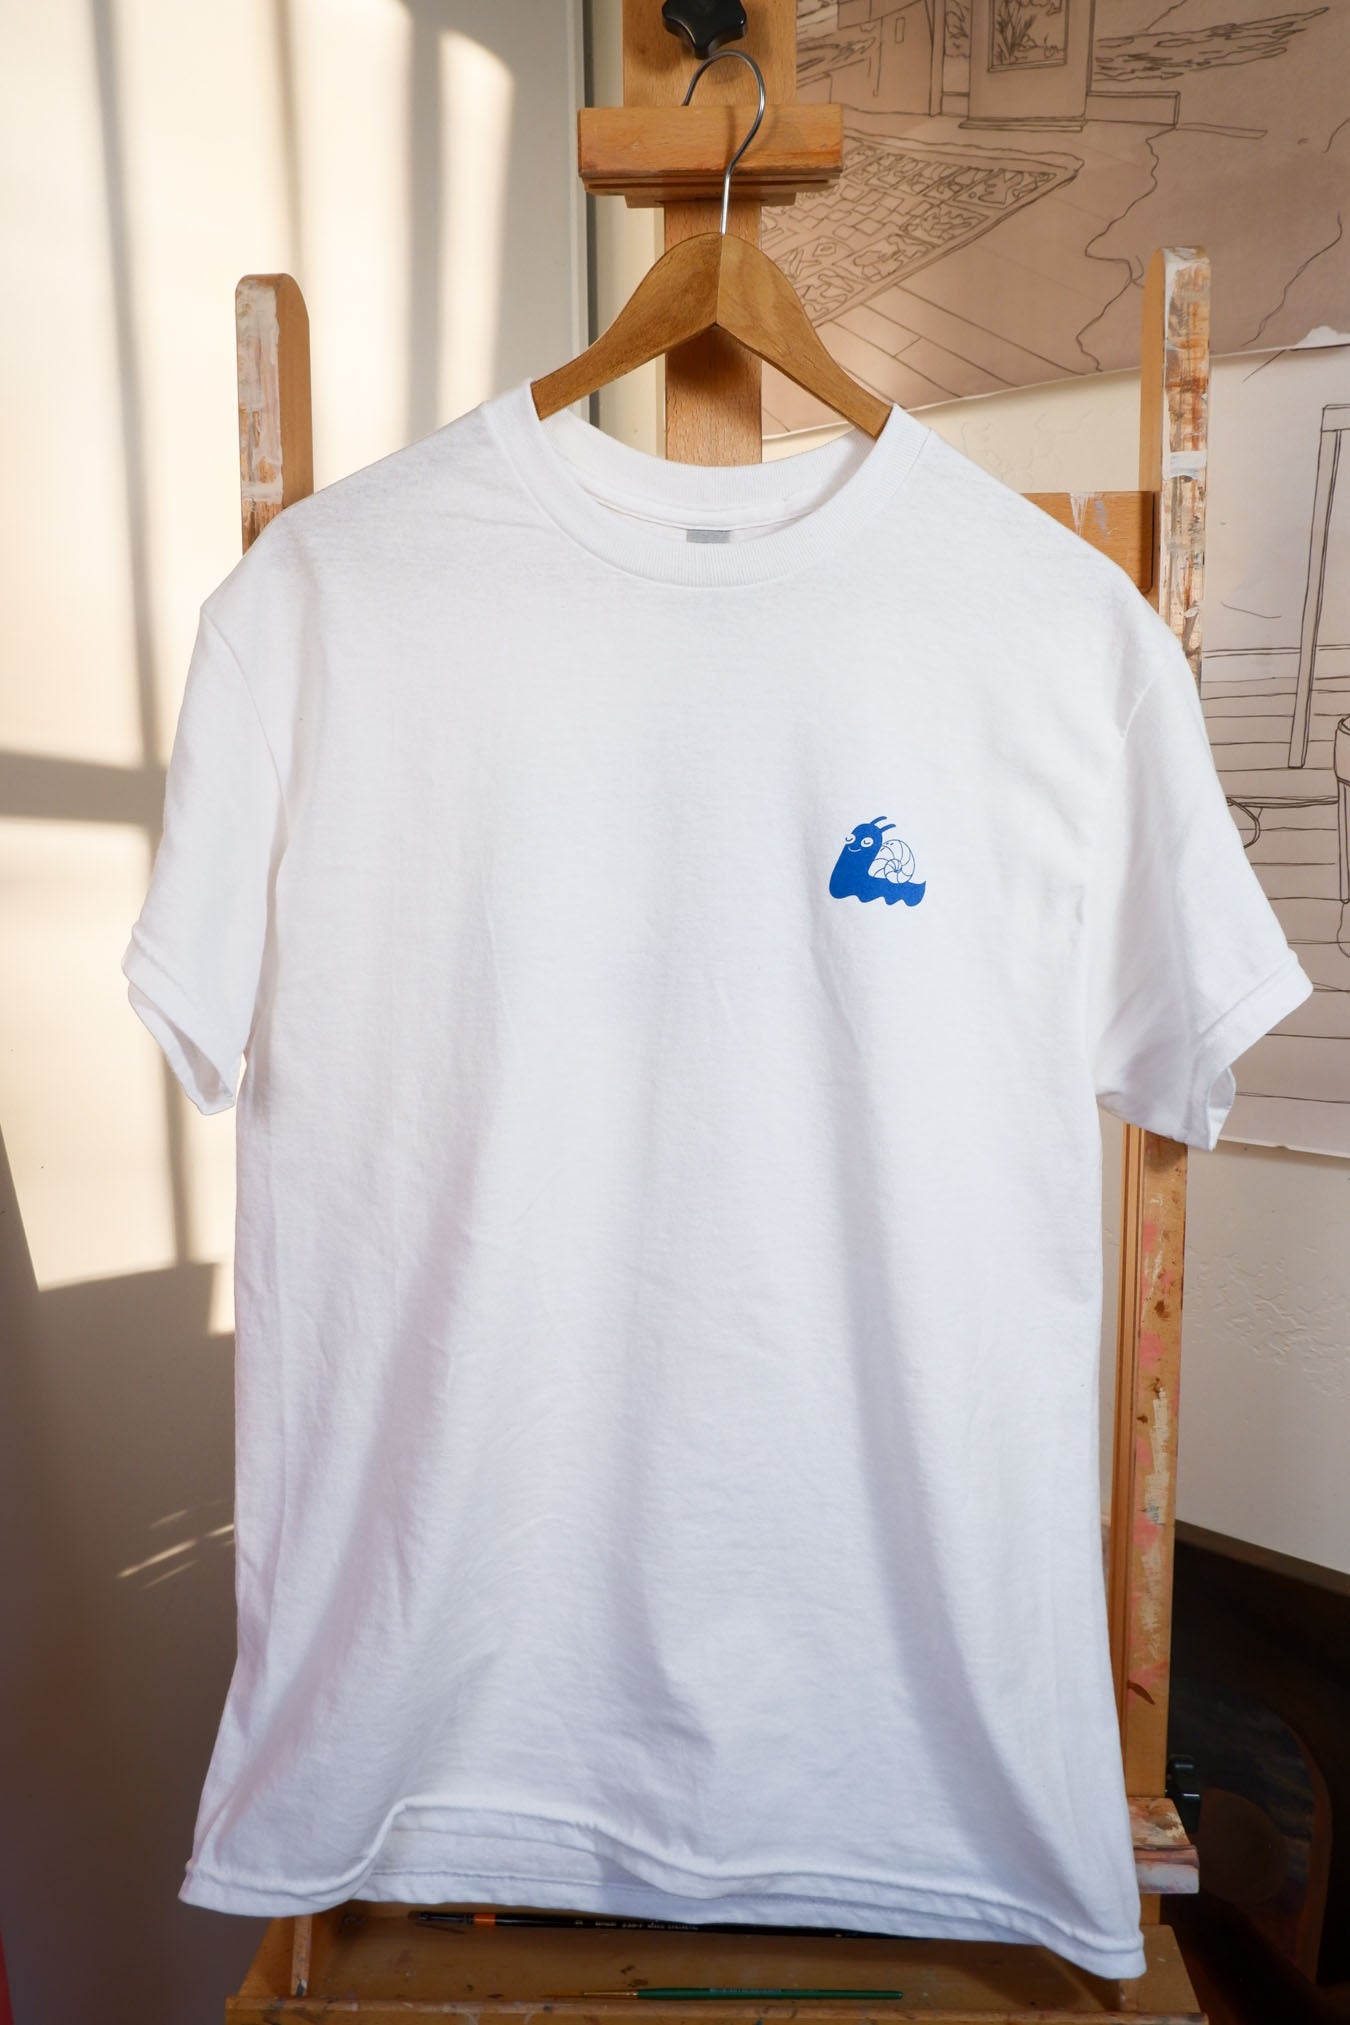 A white "Slow Down" T-shirt with a blue wave design, perfect for a casual look.